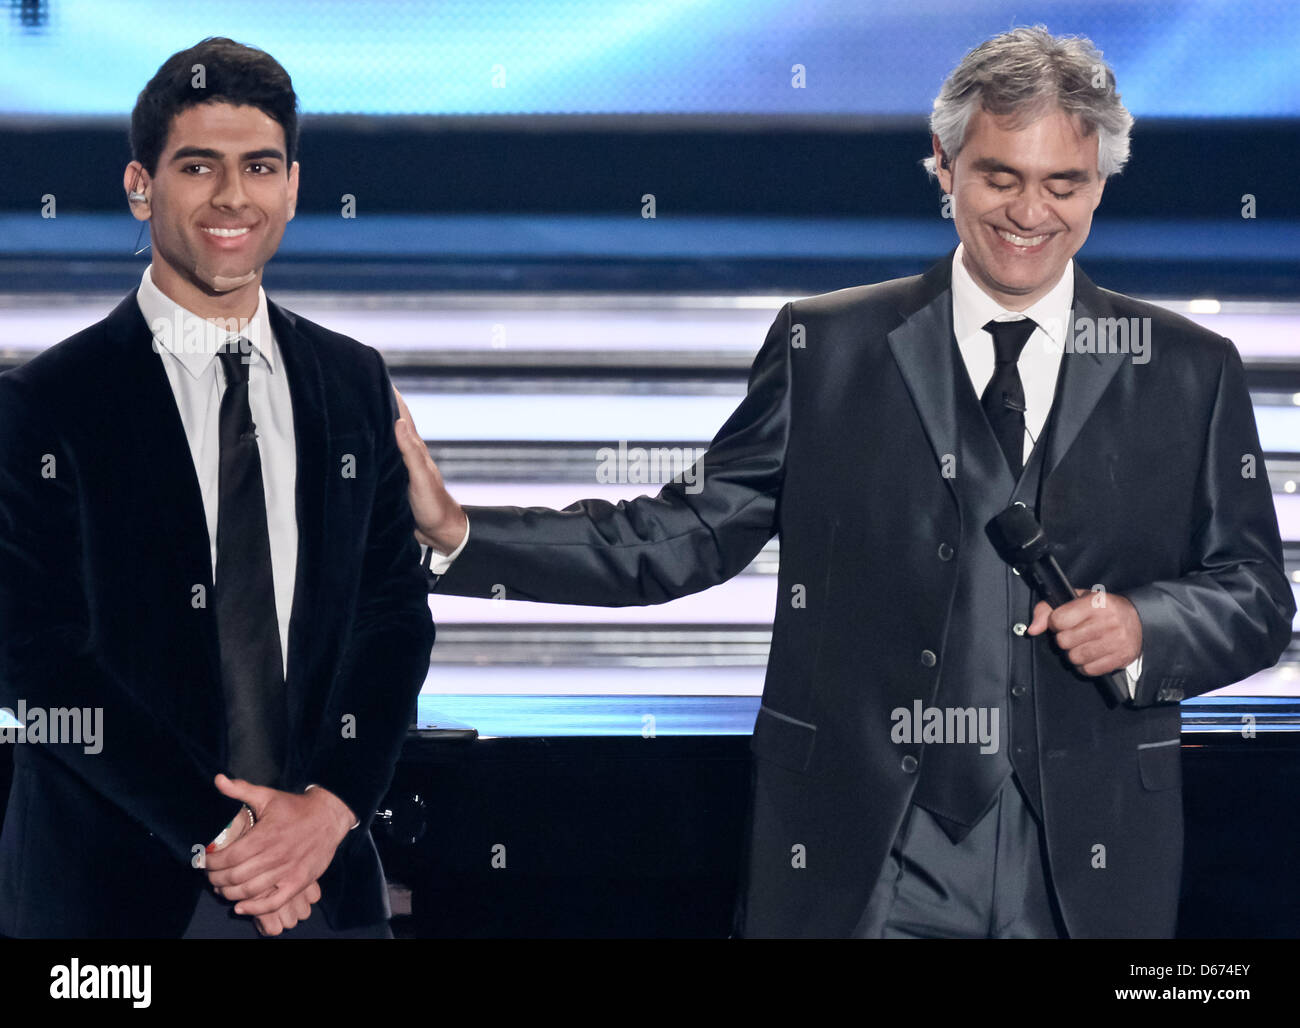 Sanremo Music Festival: Andrea Bocelli Will Perform With His Son Amos